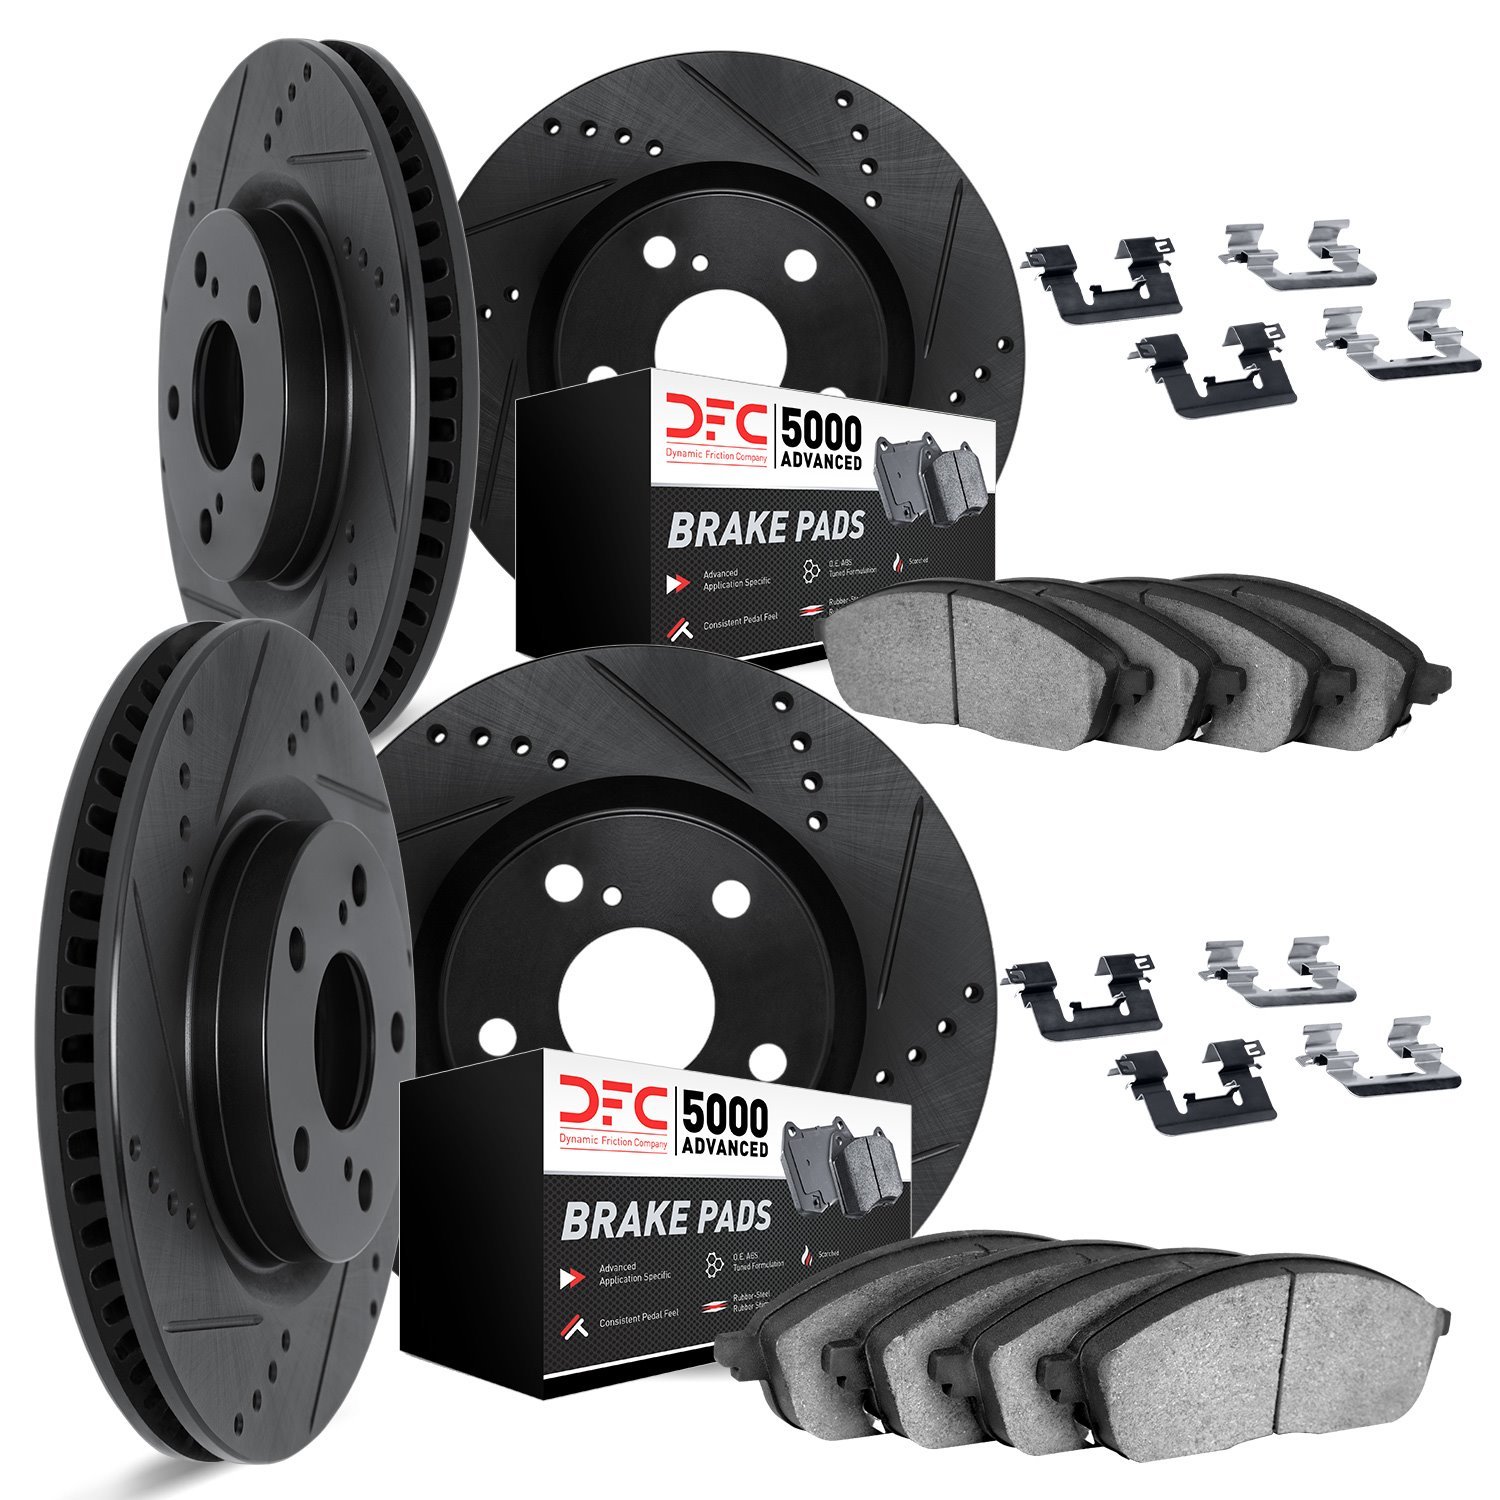 8514-27013 Drilled/Slotted Brake Rotors w/5000 Advanced Brake Pads Kit & Hardware [Black], 2007-2015 Volvo, Position: Front and